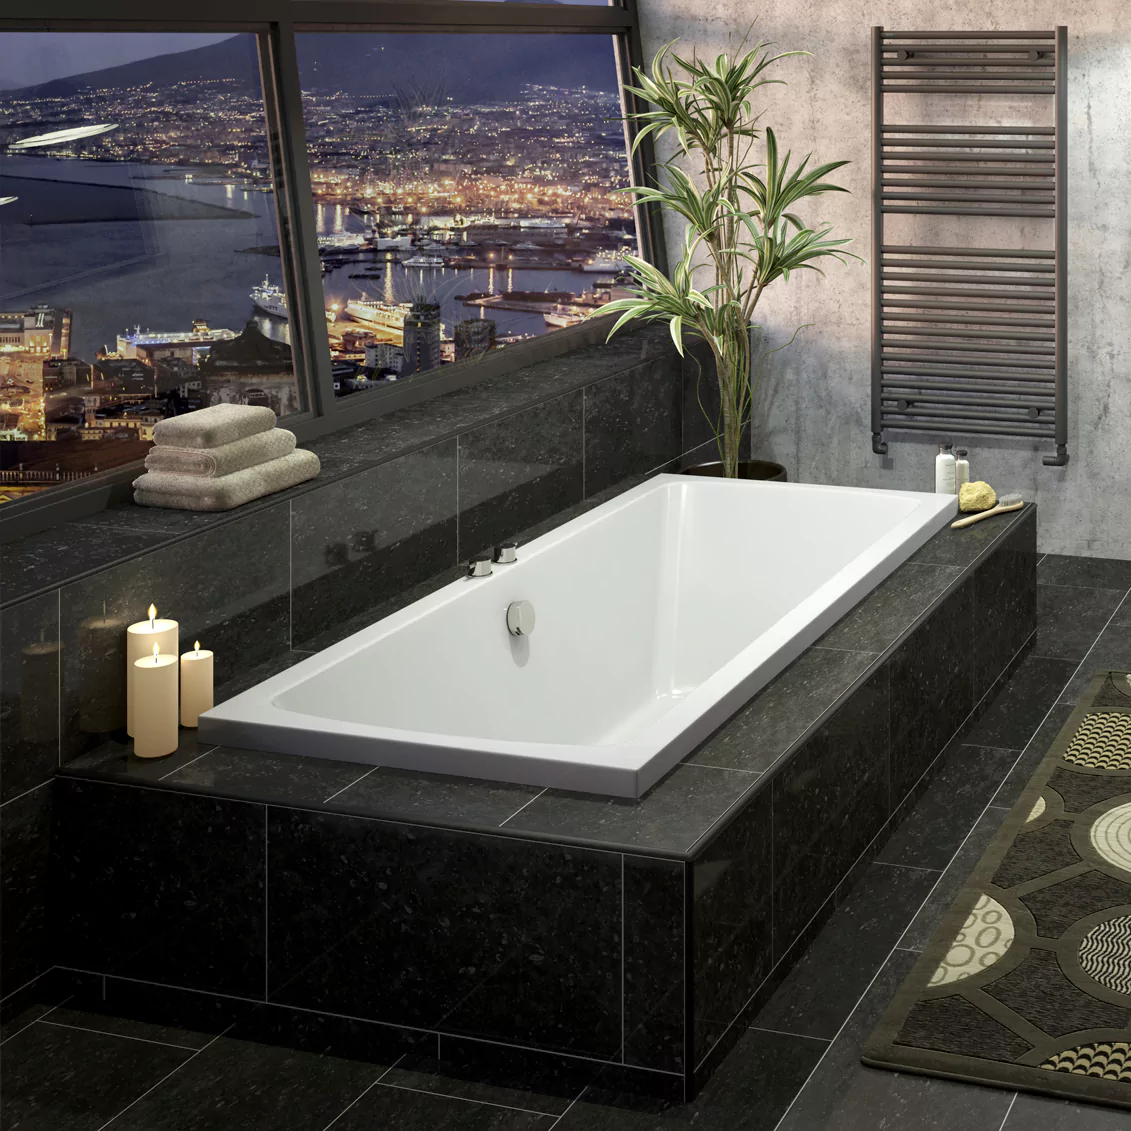 Tissino Lorenzo Premium Double Ended Acrylic Bath 1700x750mm, in a bathroom space. Black tiles, city view